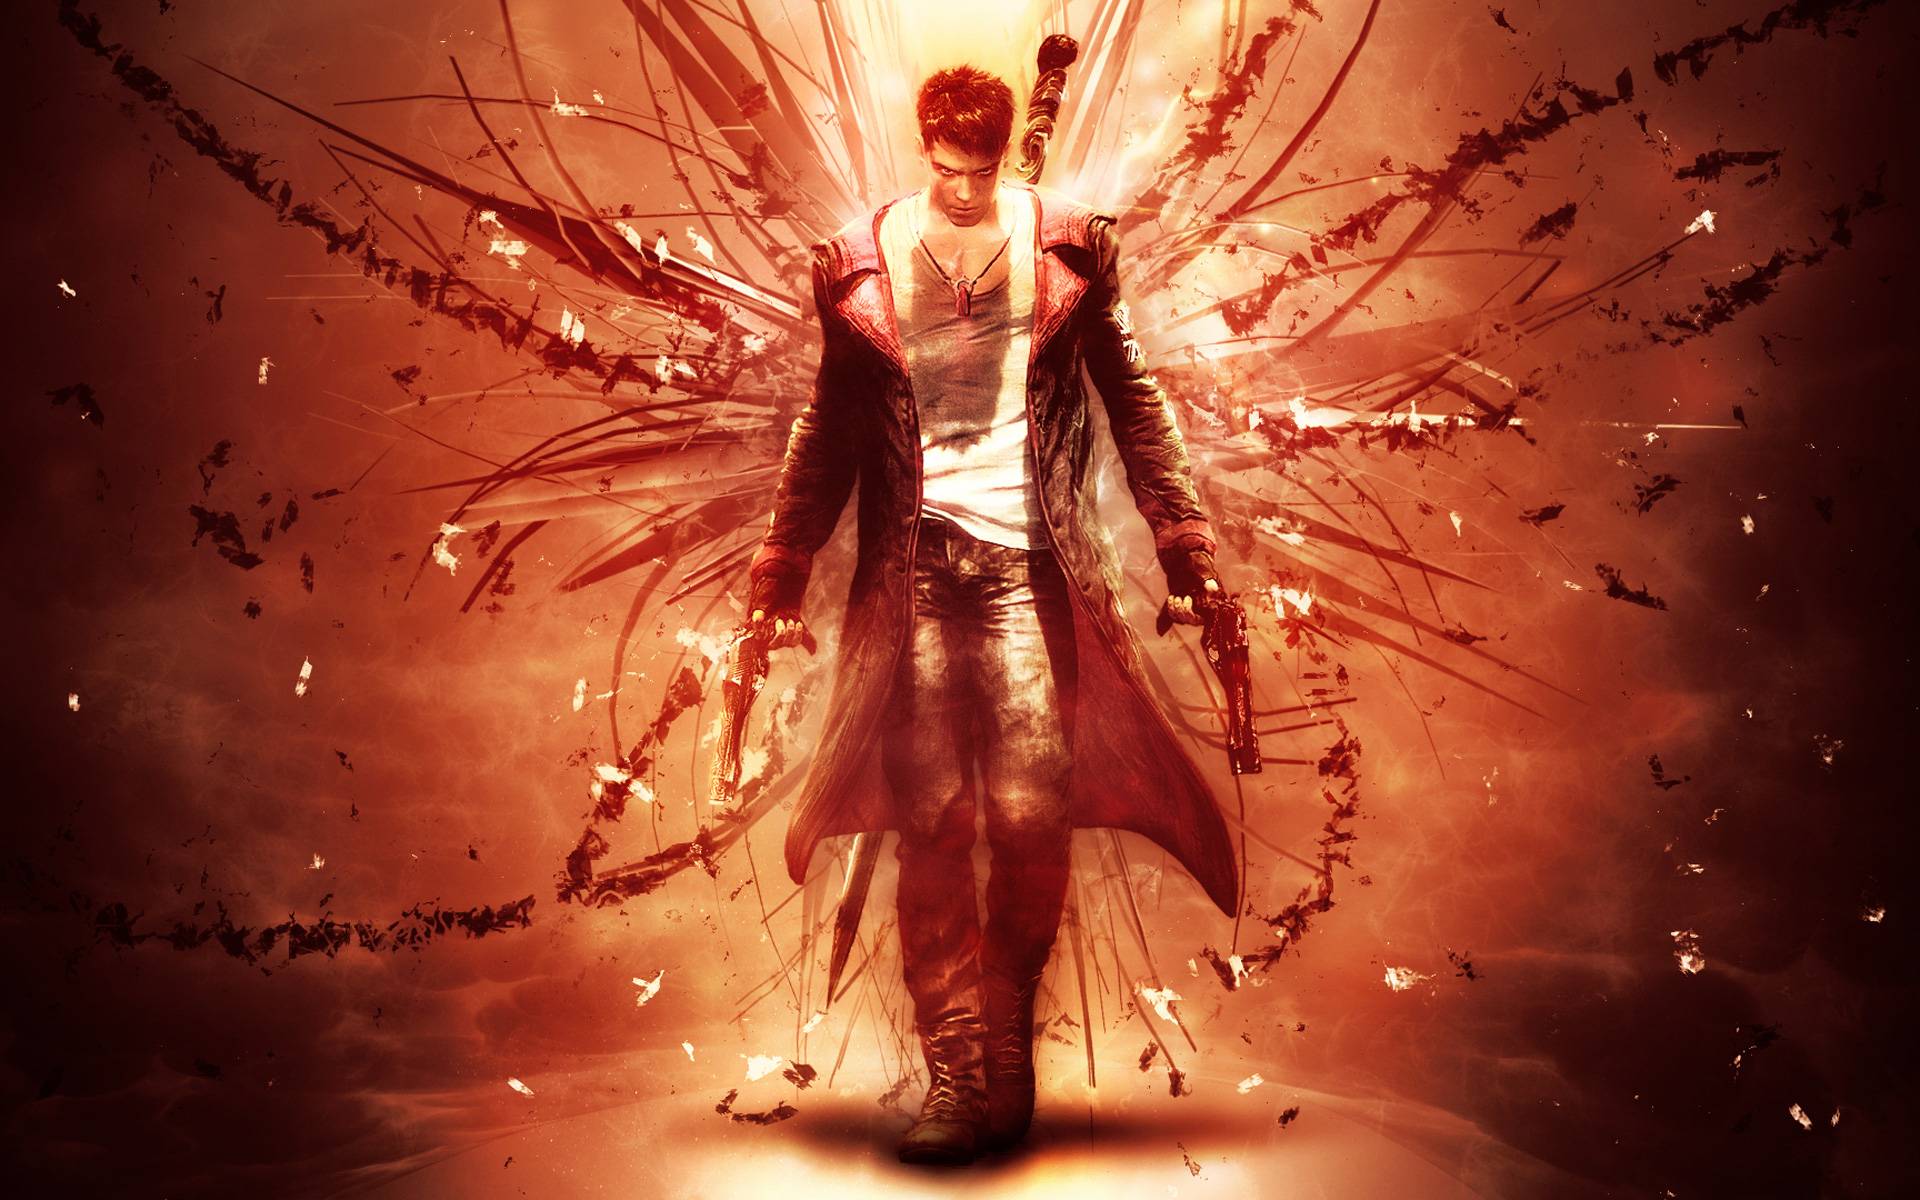 DmC Devil May Cry Wallpapers In HD GamingBoltcom Video Game News 1920x1200